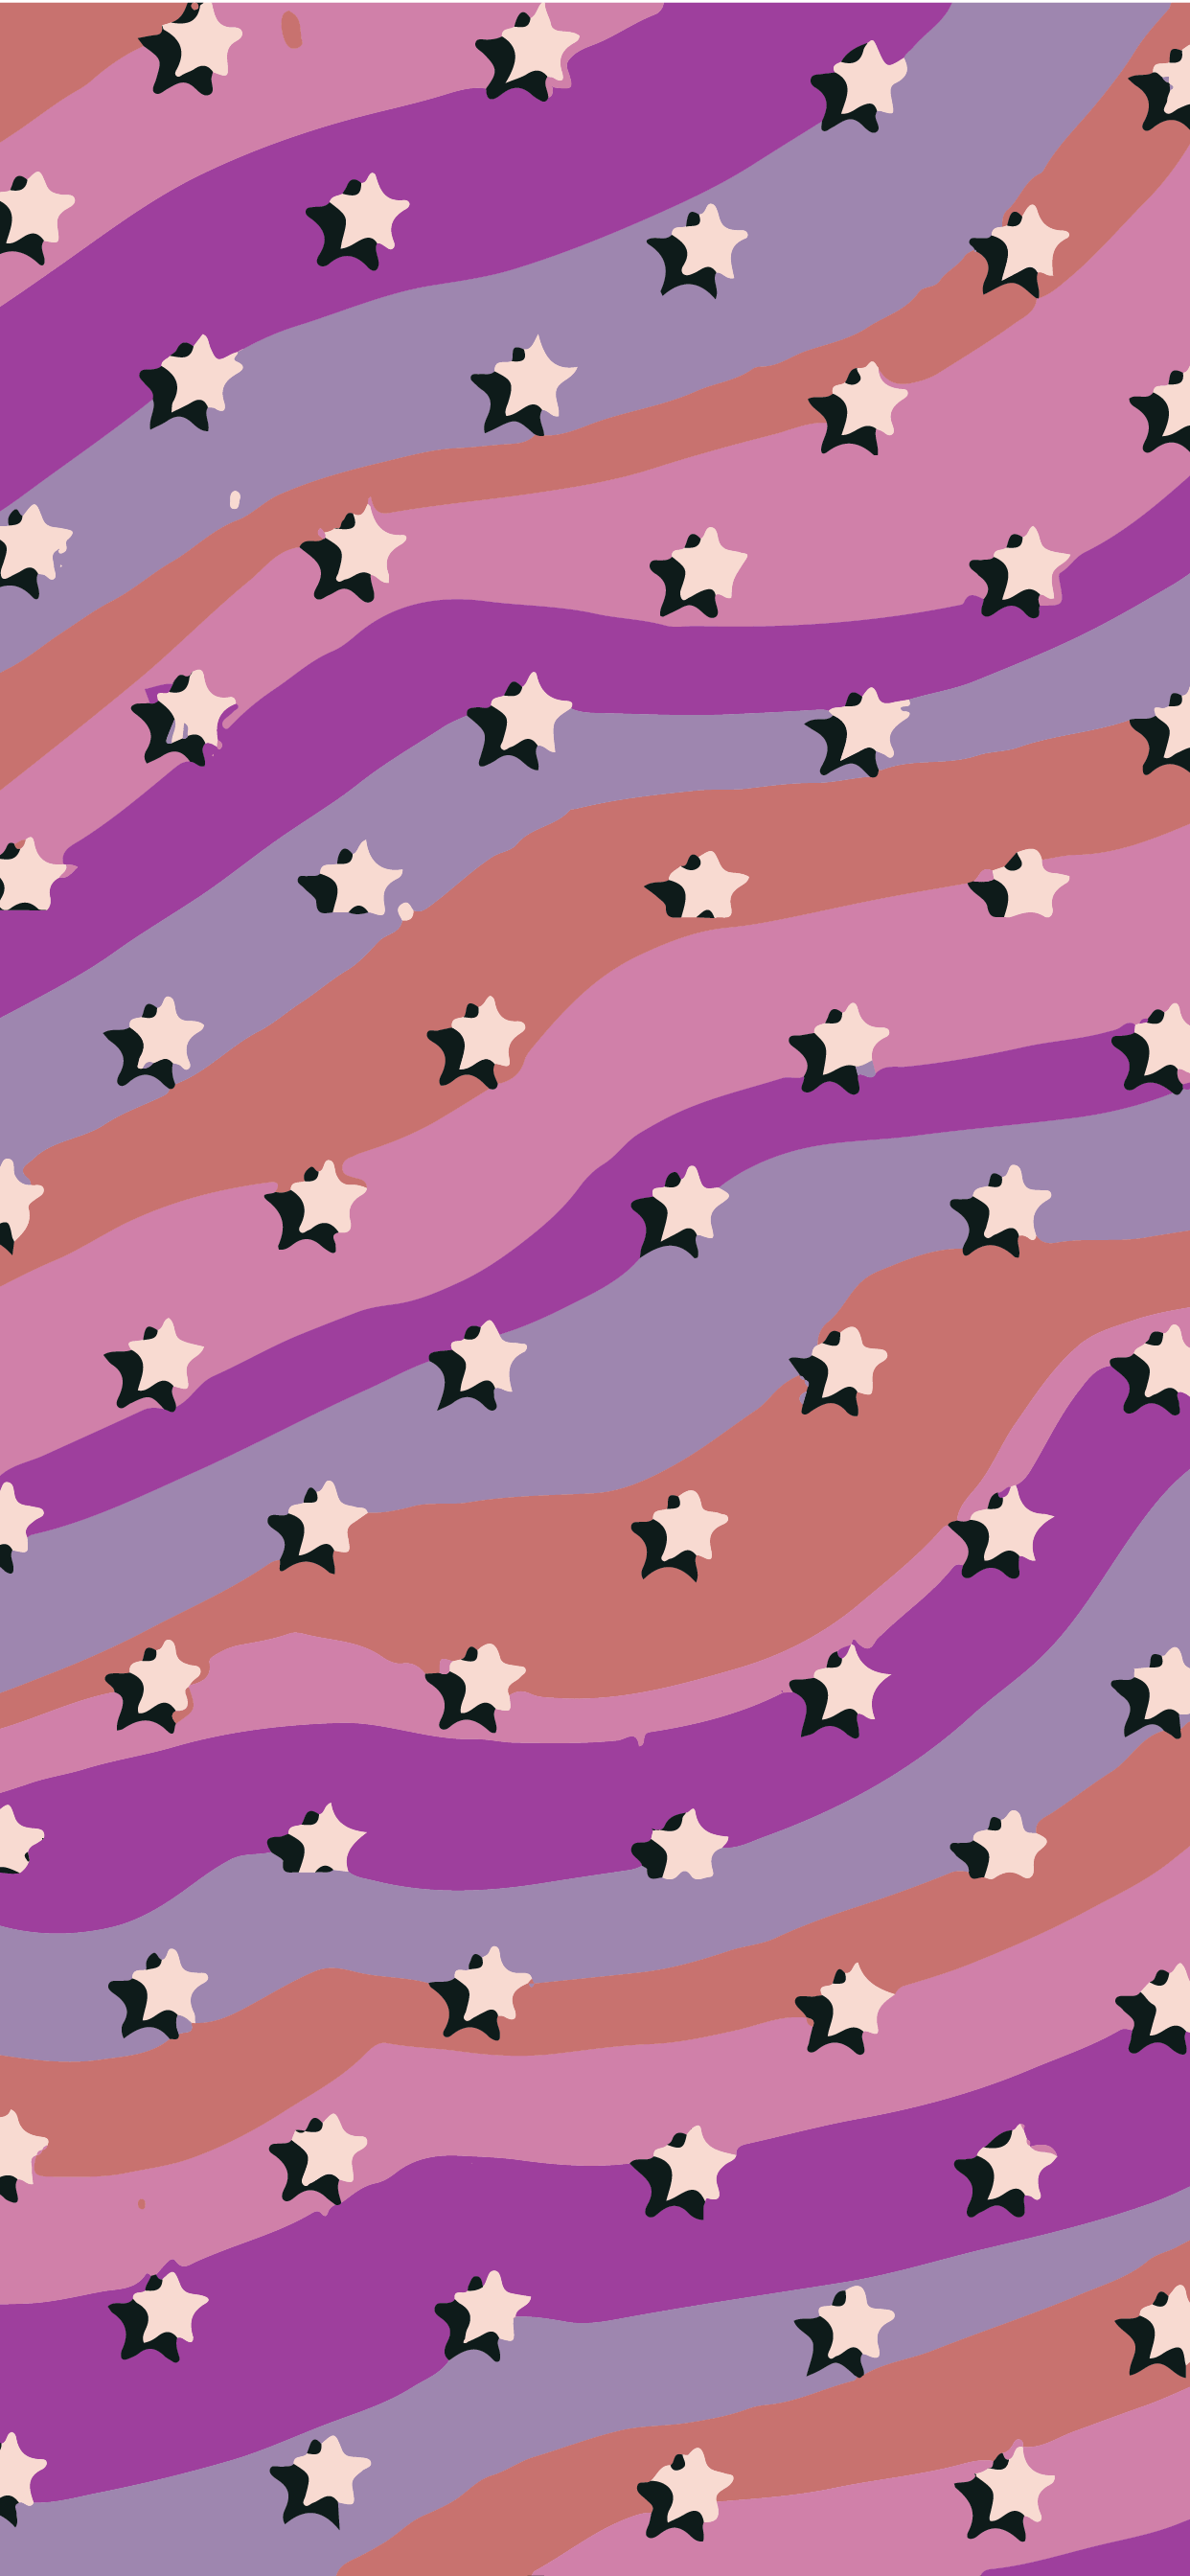 A pattern of stars on pink and purple background - Colorful